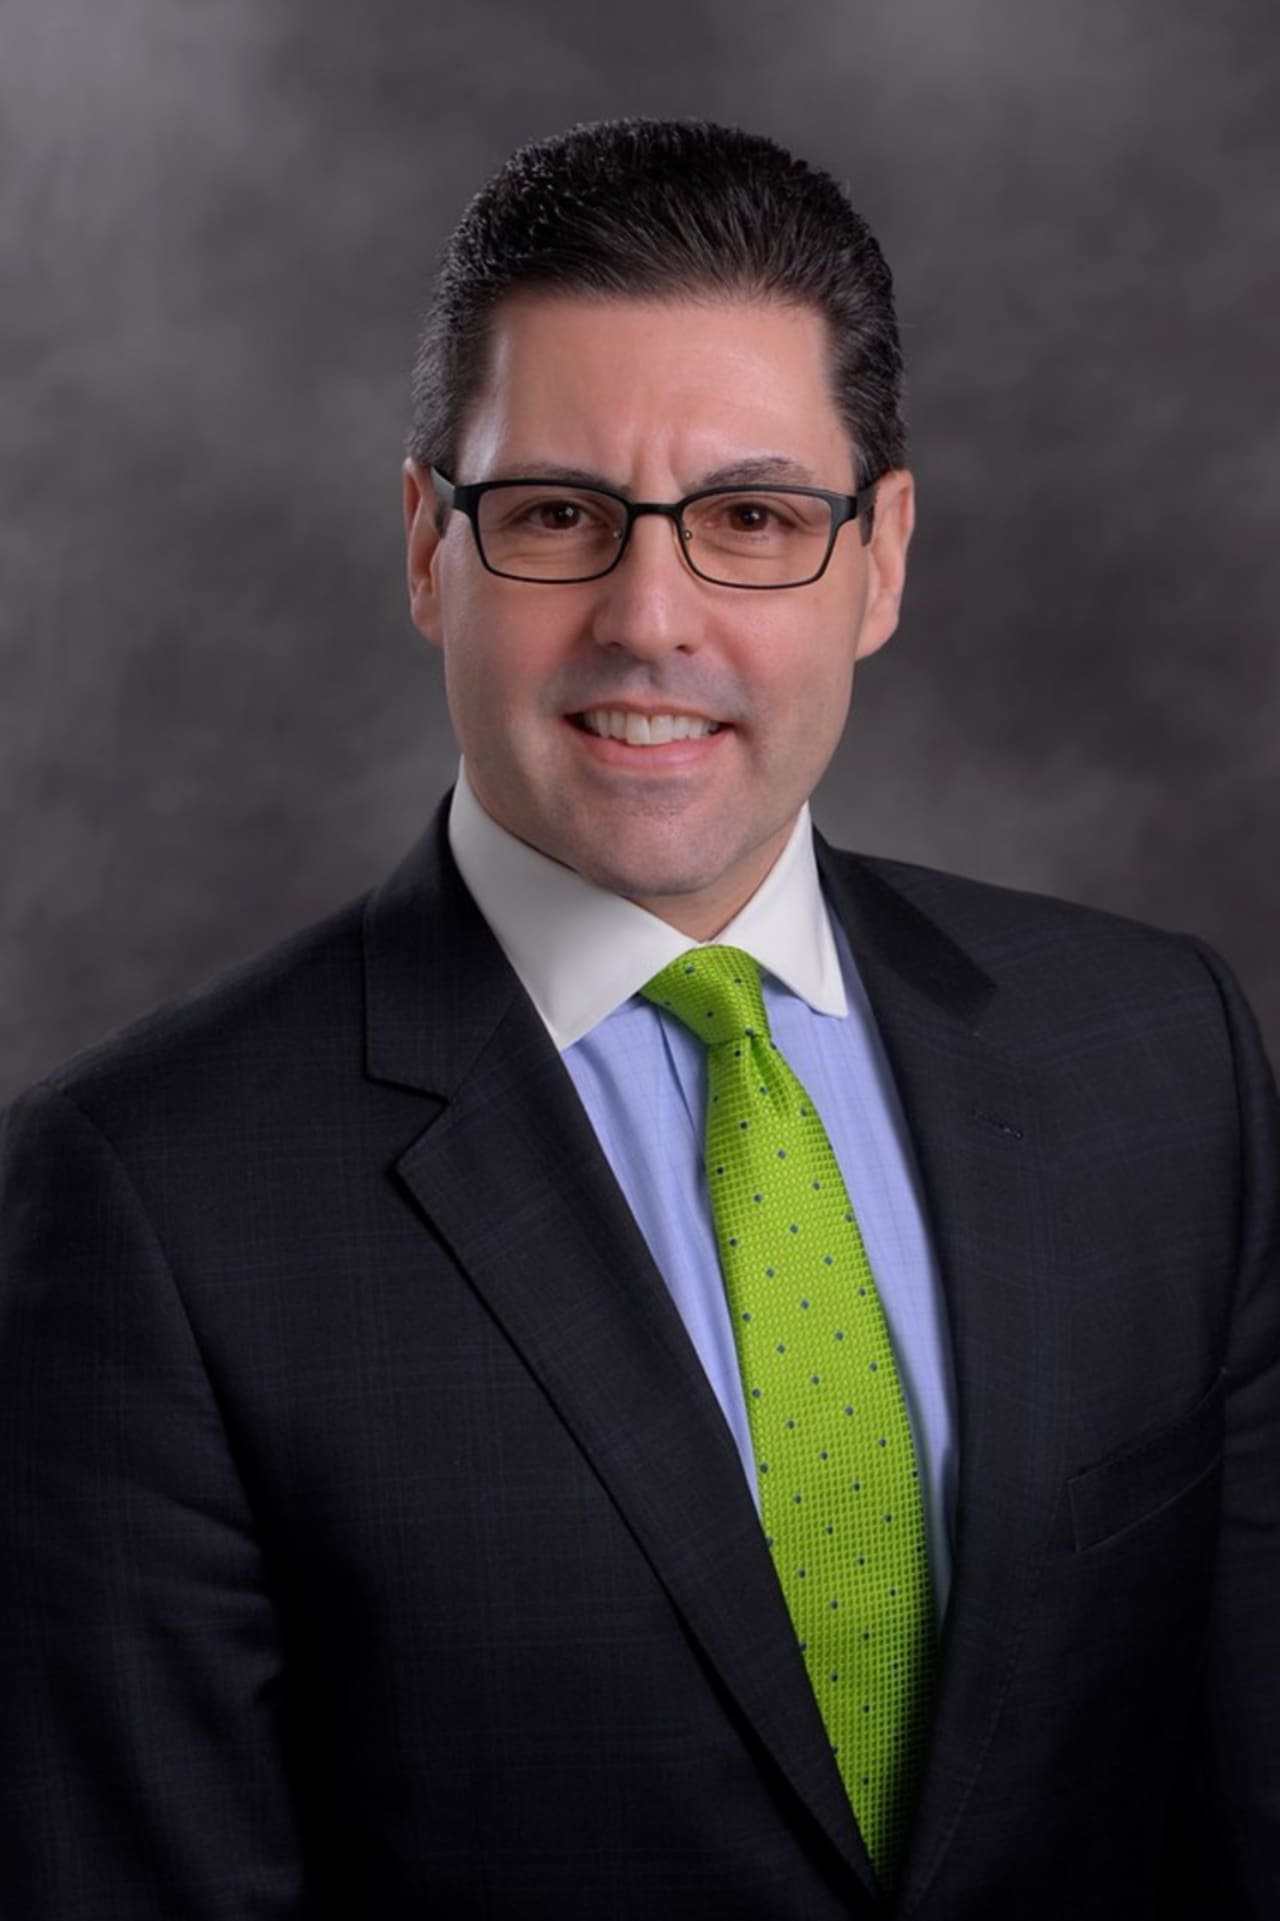 Joseph J. Guarracino has been named one of the best healthcare CFOs in the nation by Becker’s Hospital Review.